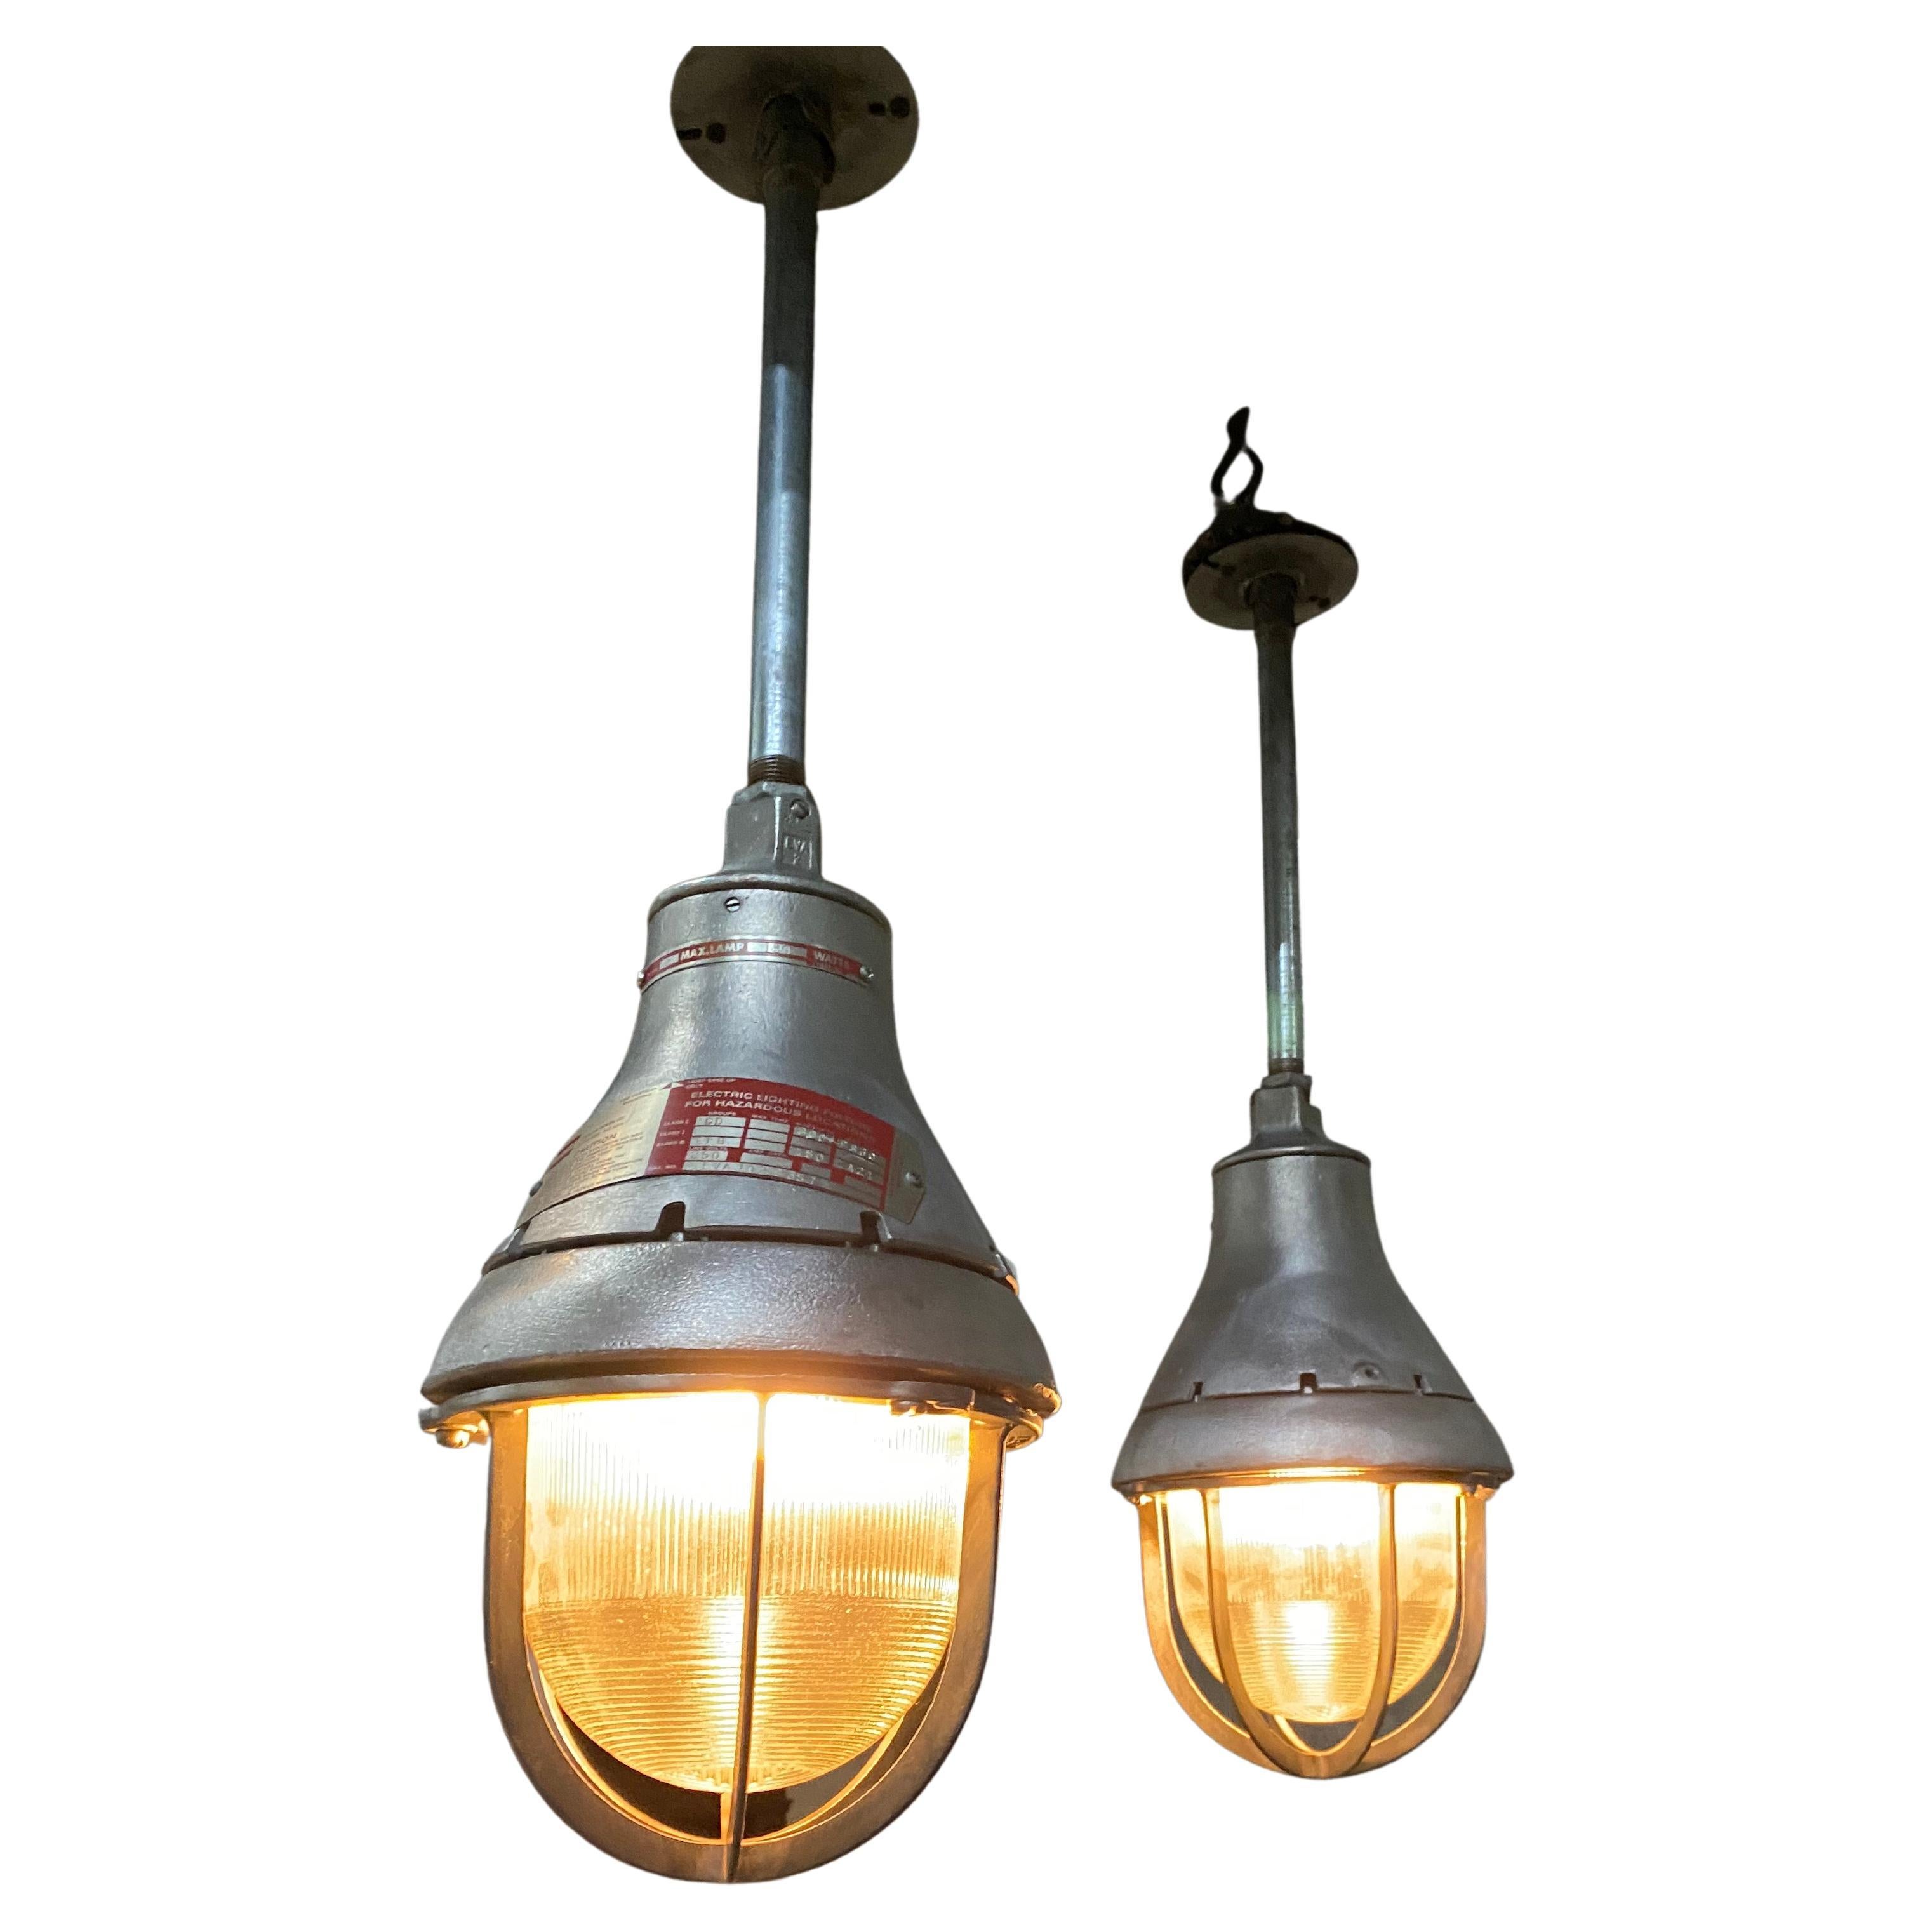 1930 Crouse Hinds Industrial Pendant